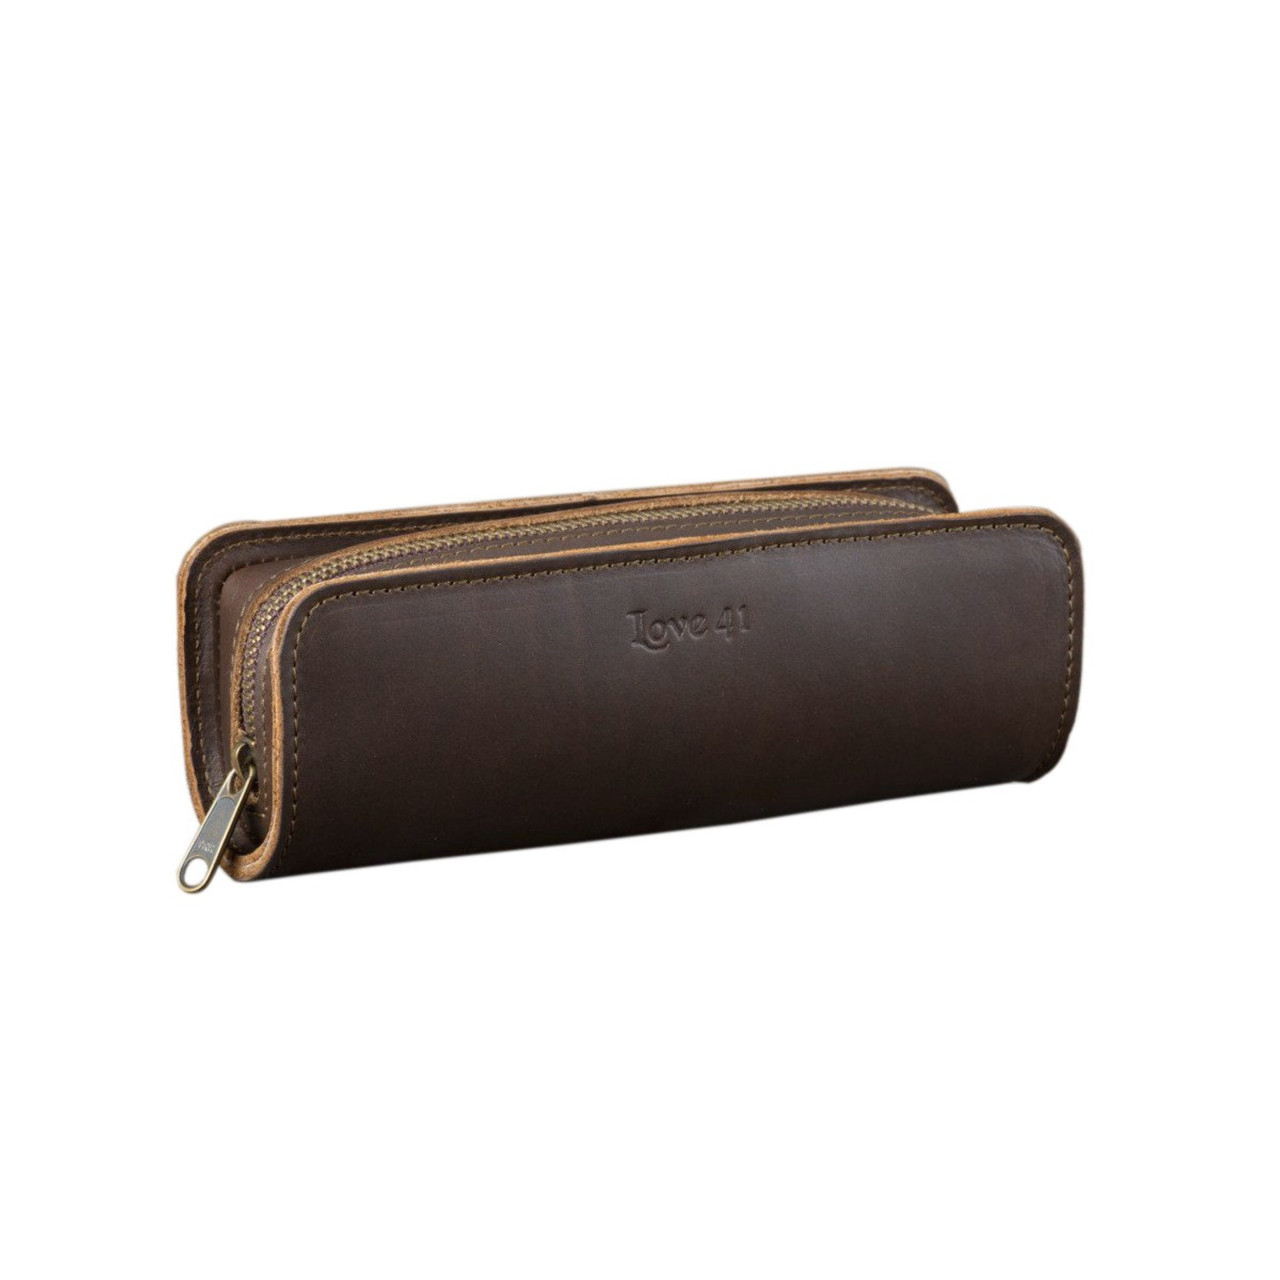 Genuine Leather Pencil Pouch, Leather Pencil Case - Raiz – Ibera Leather -  Handcrafted full grain leather products